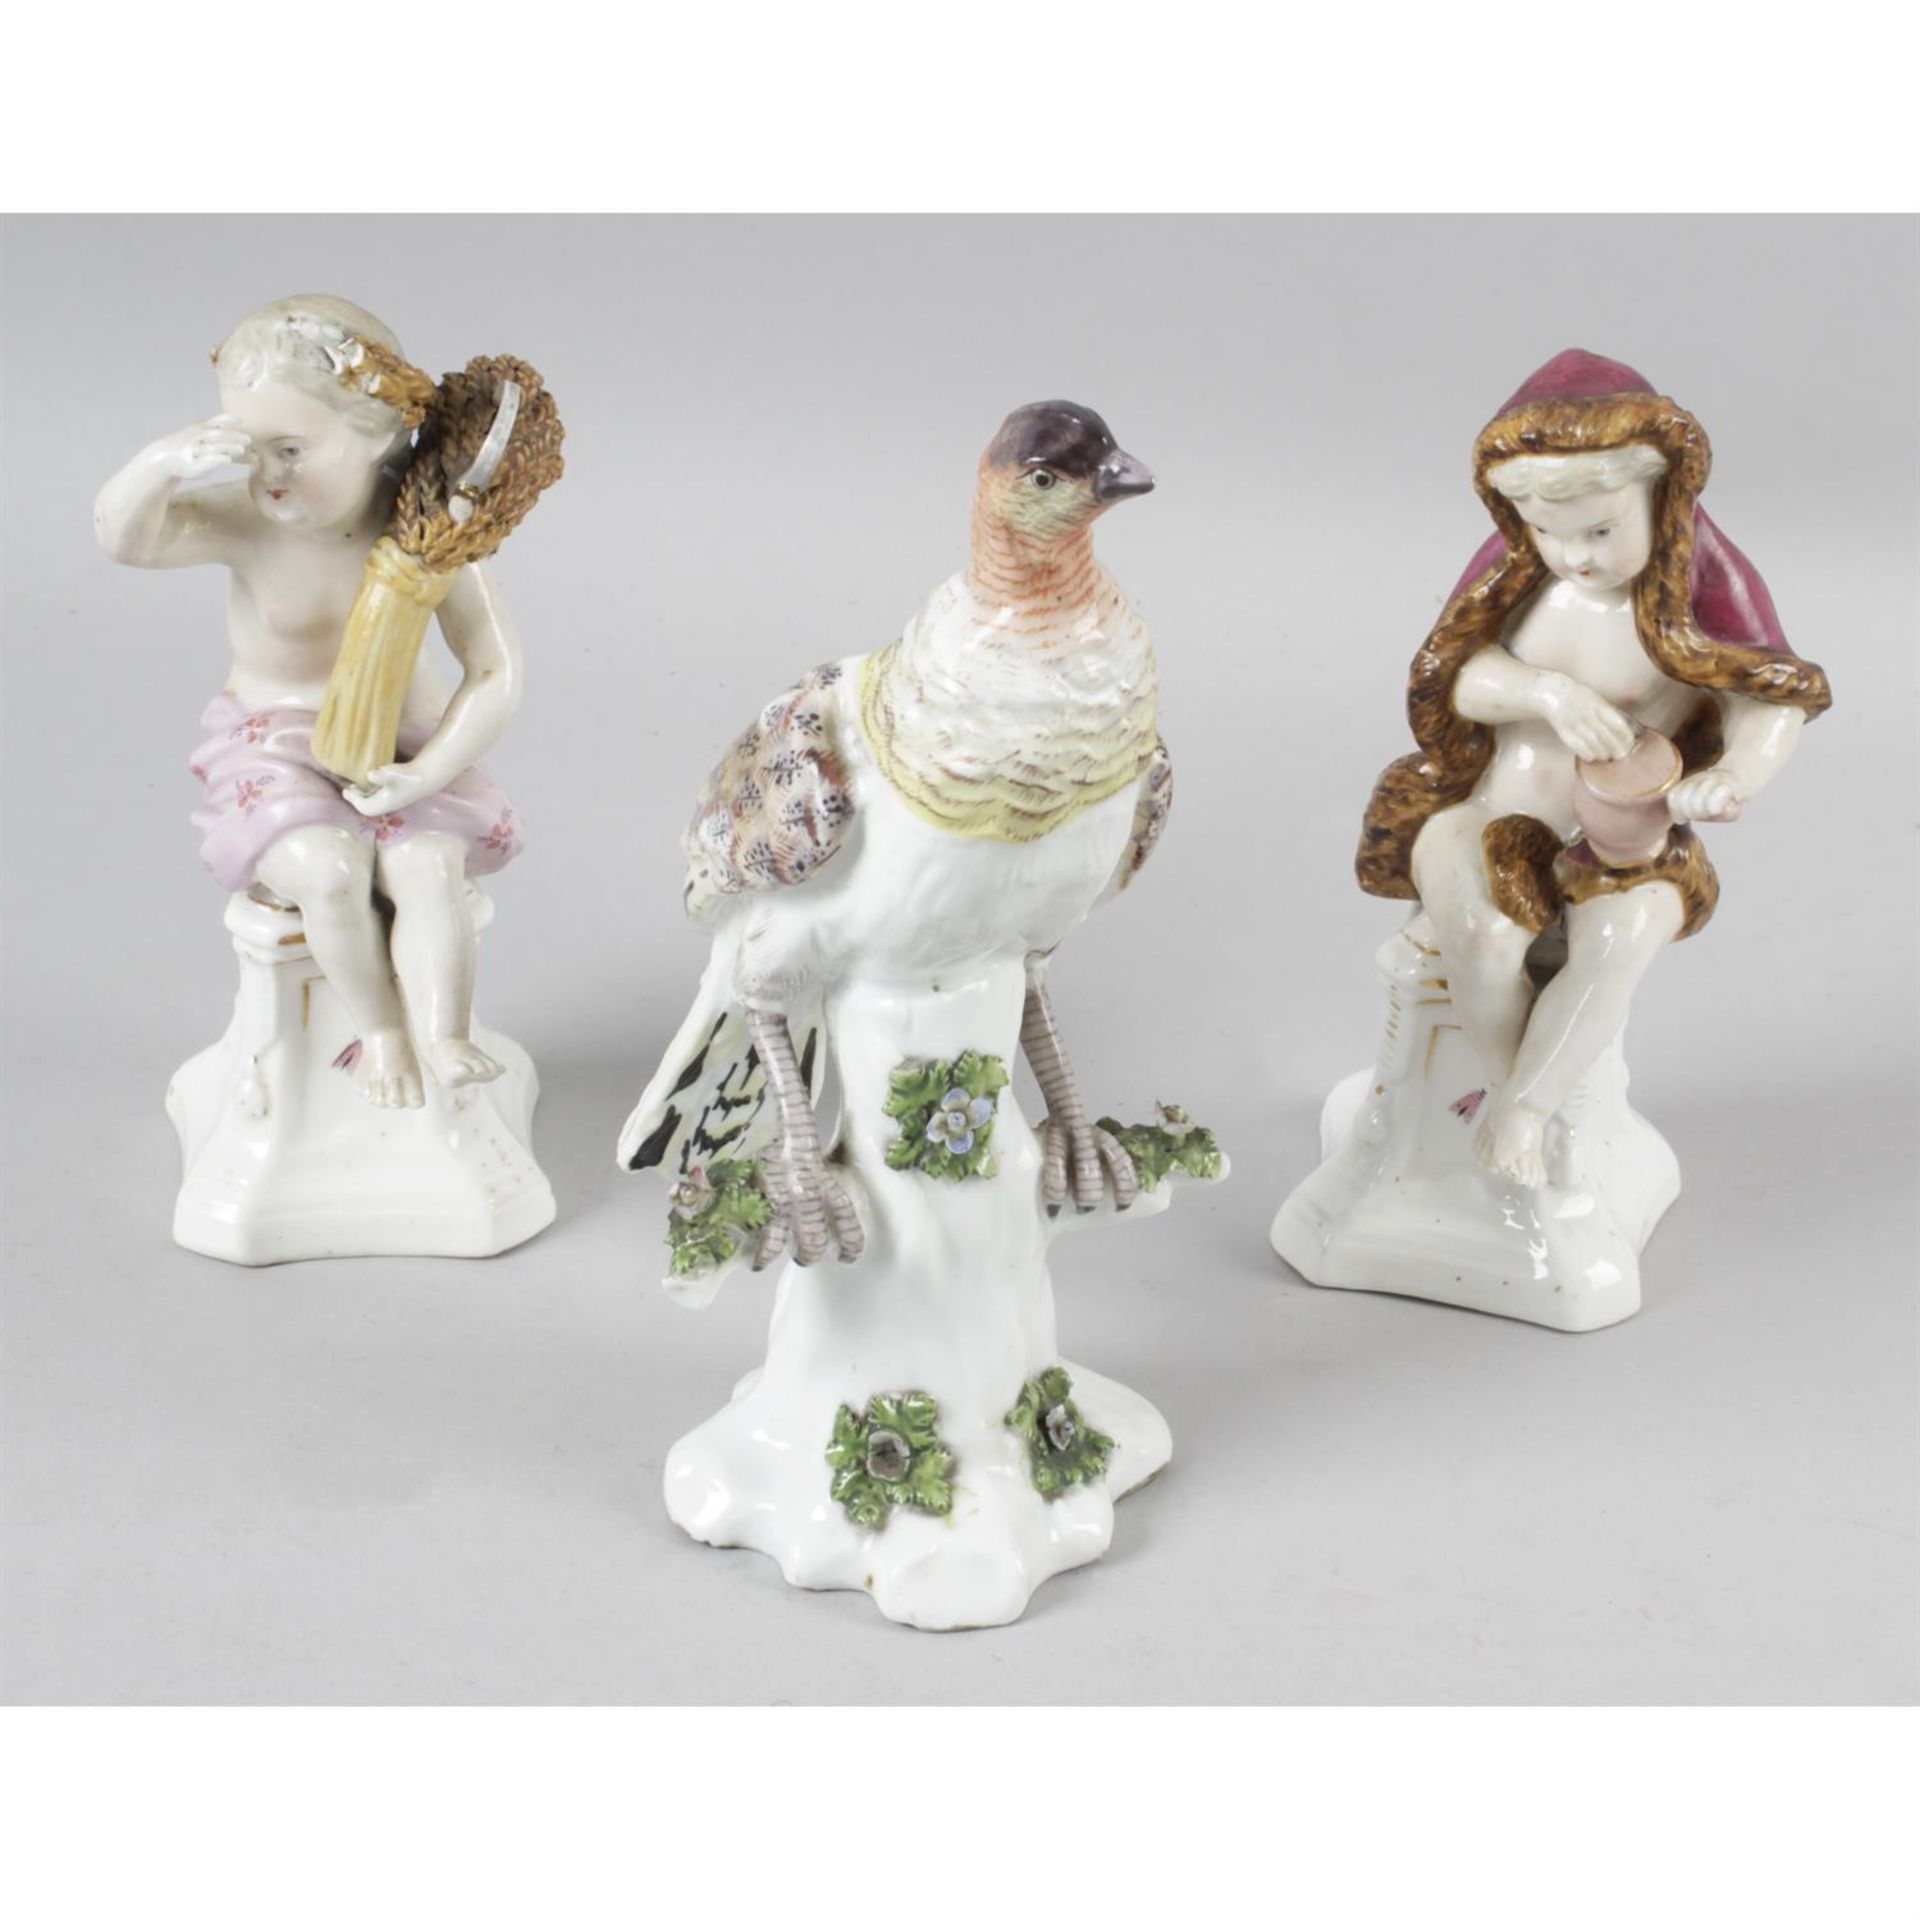 A 19th century porcelain figure, together with a pair of 19th century continental porcelain figures.